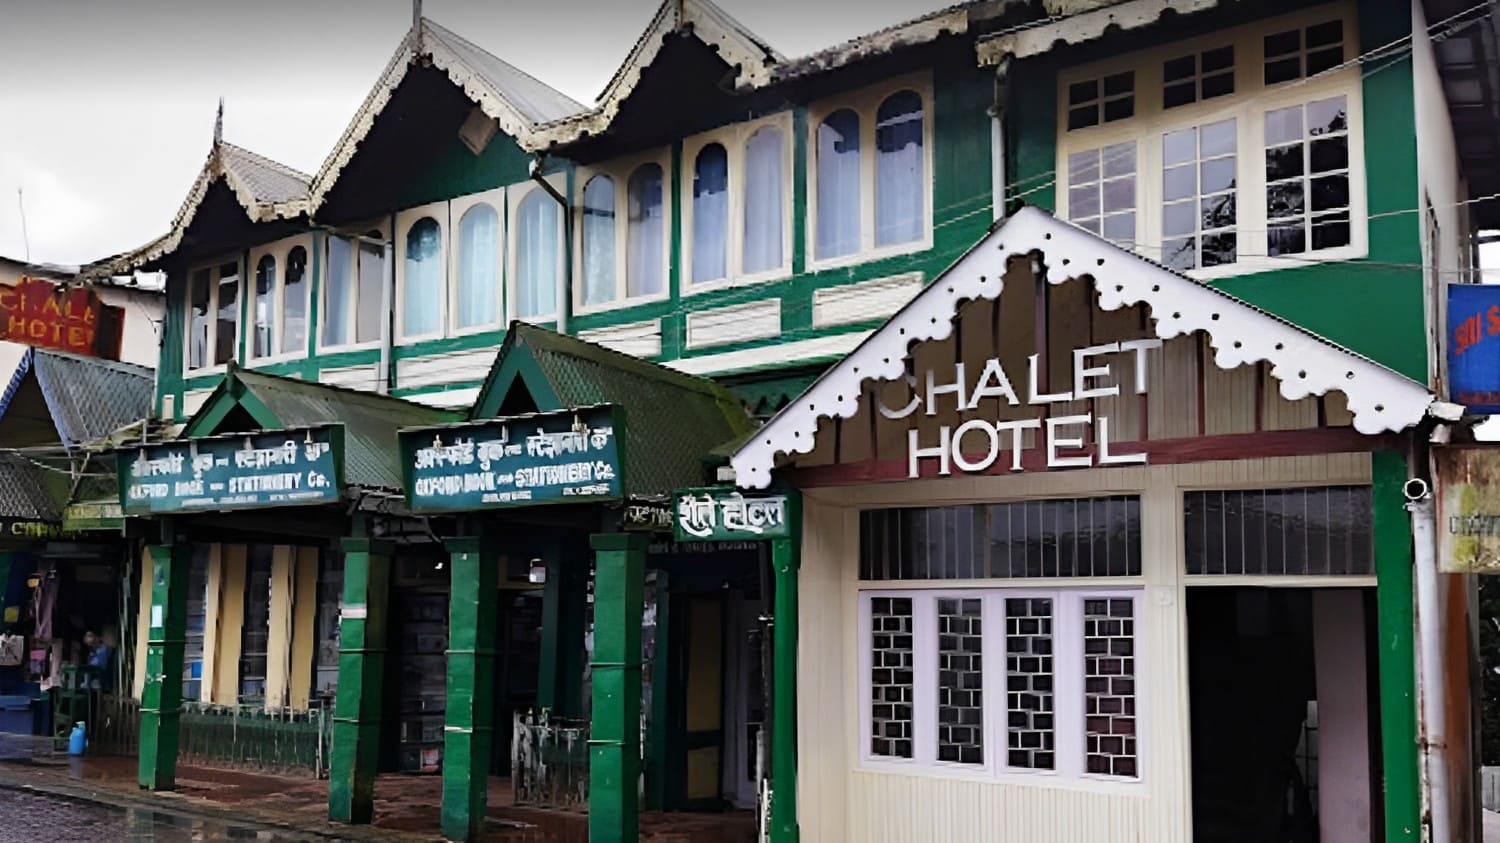 Chalet Hotels Q1FY24 Results: Consolidated PAT of Rs. 88.66 Cr